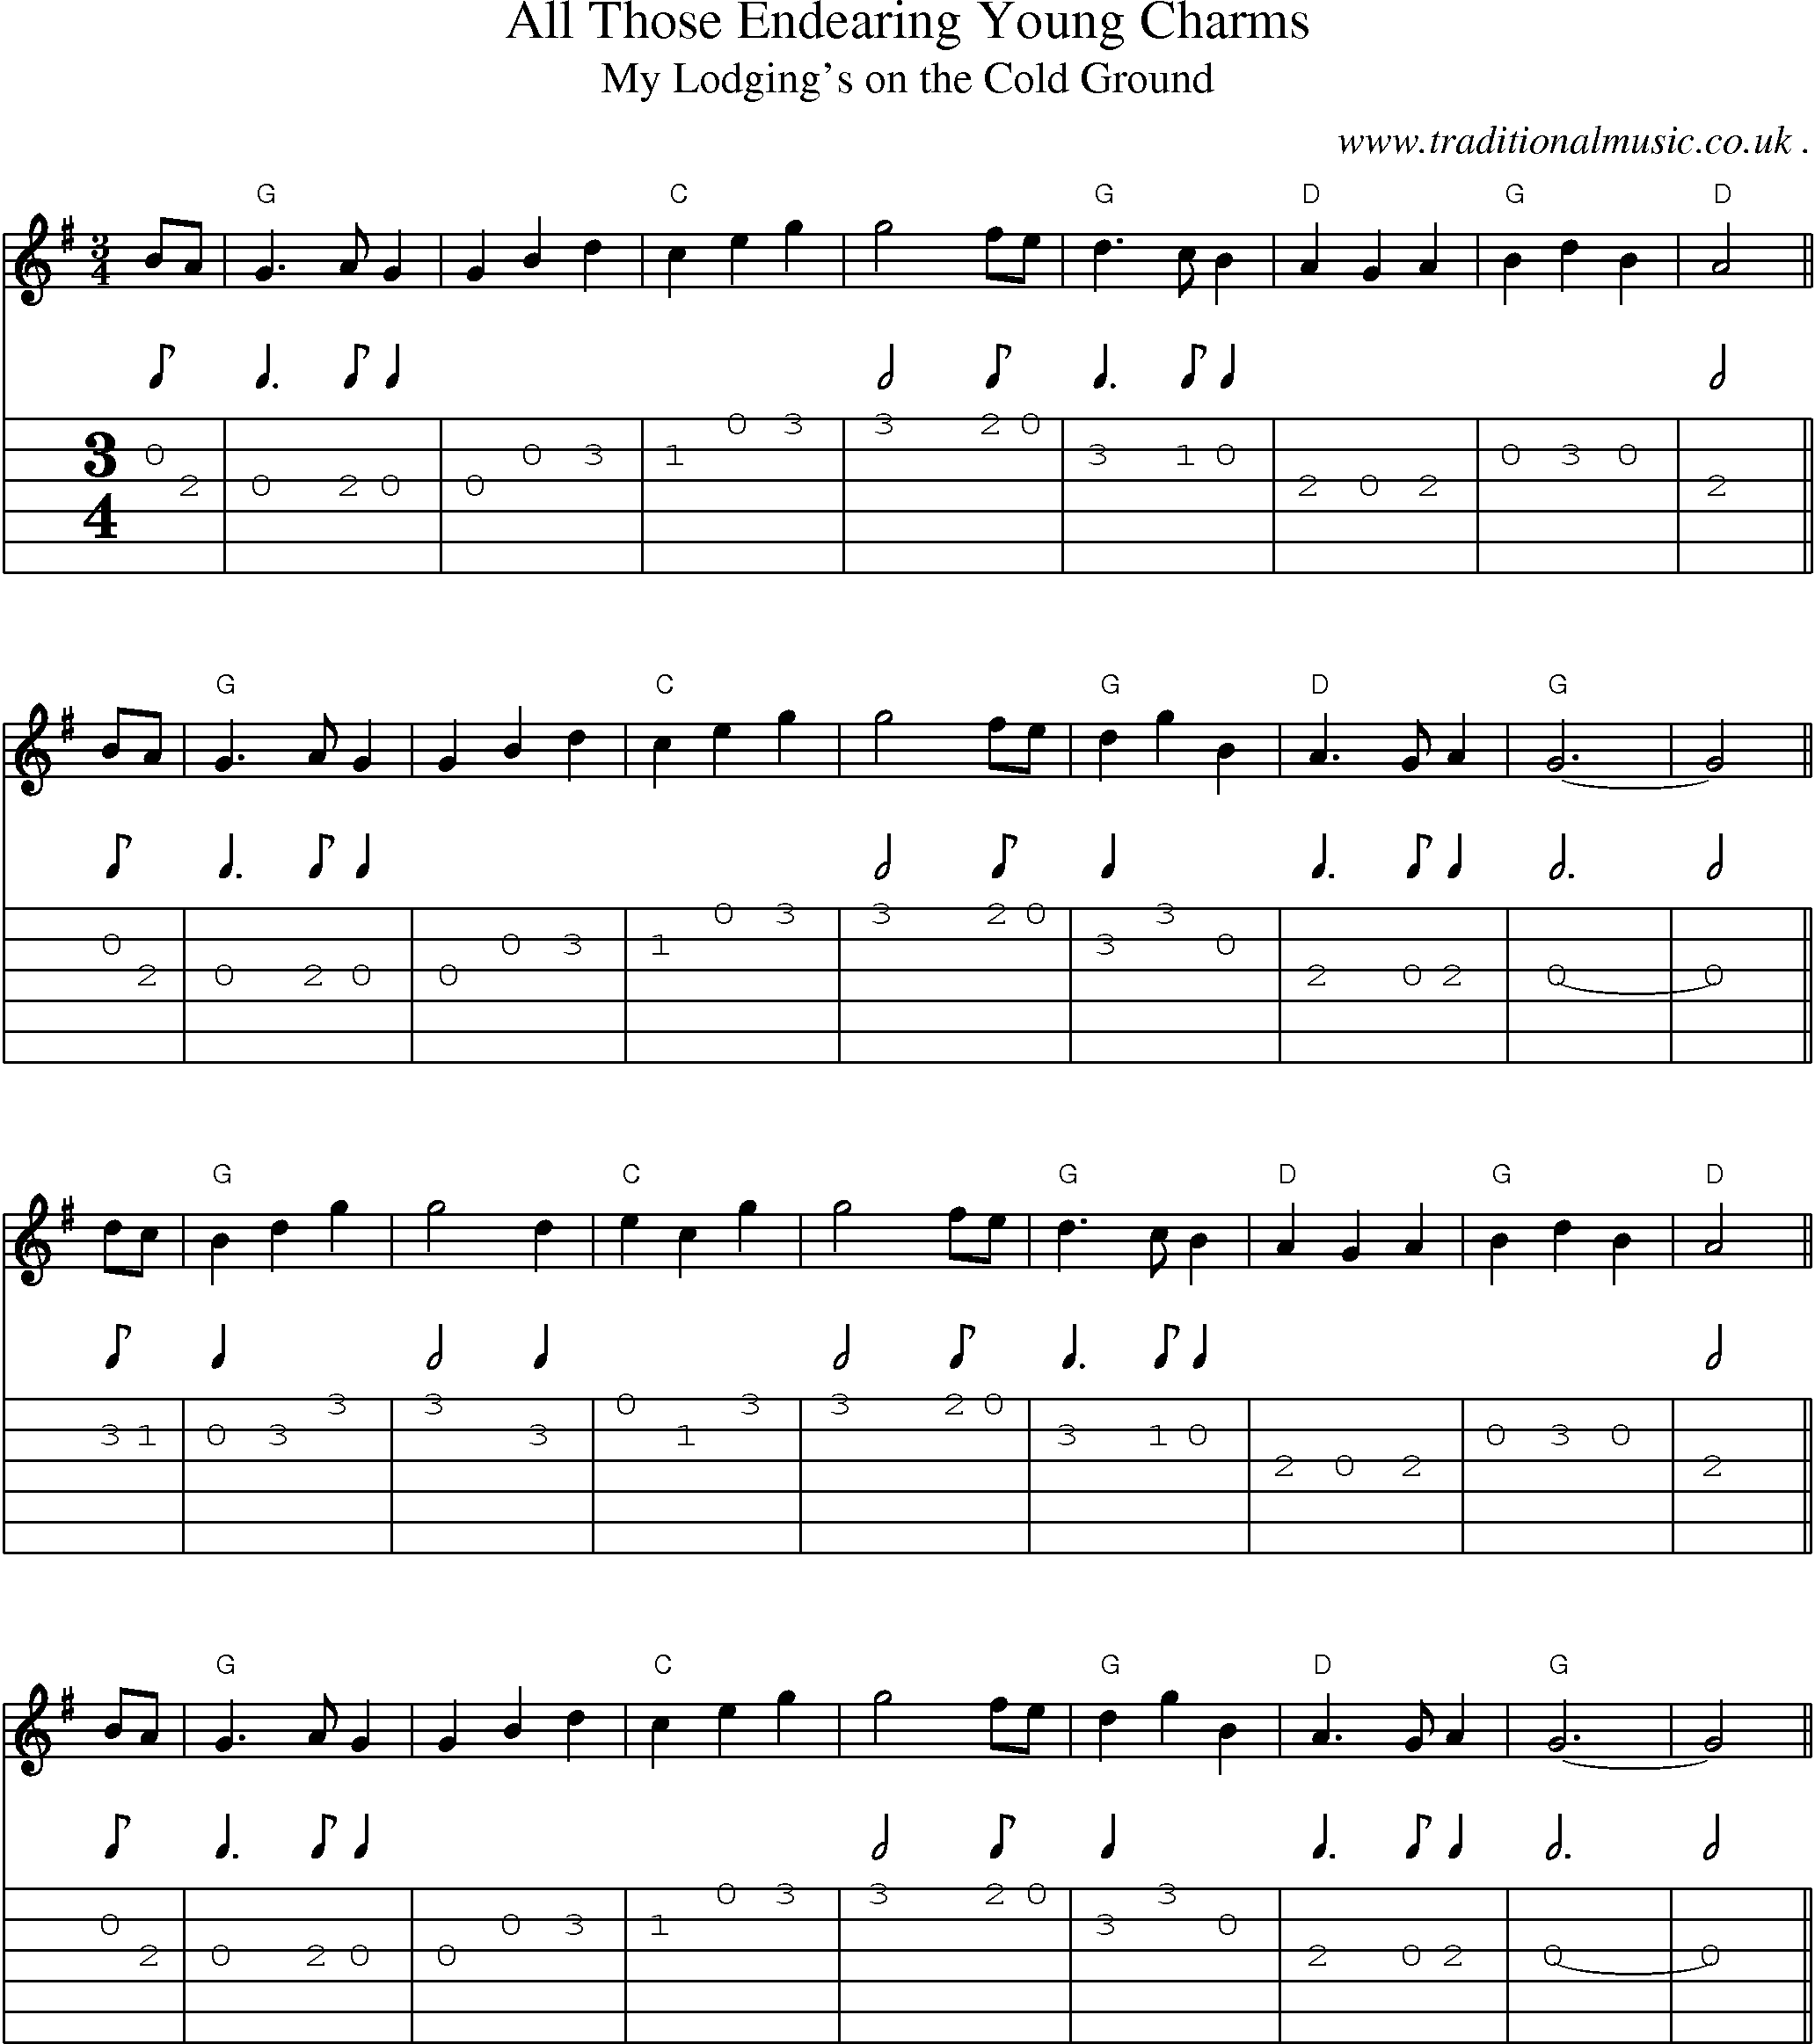 Music Score and Guitar Tabs for All Those Endearing Young Charms